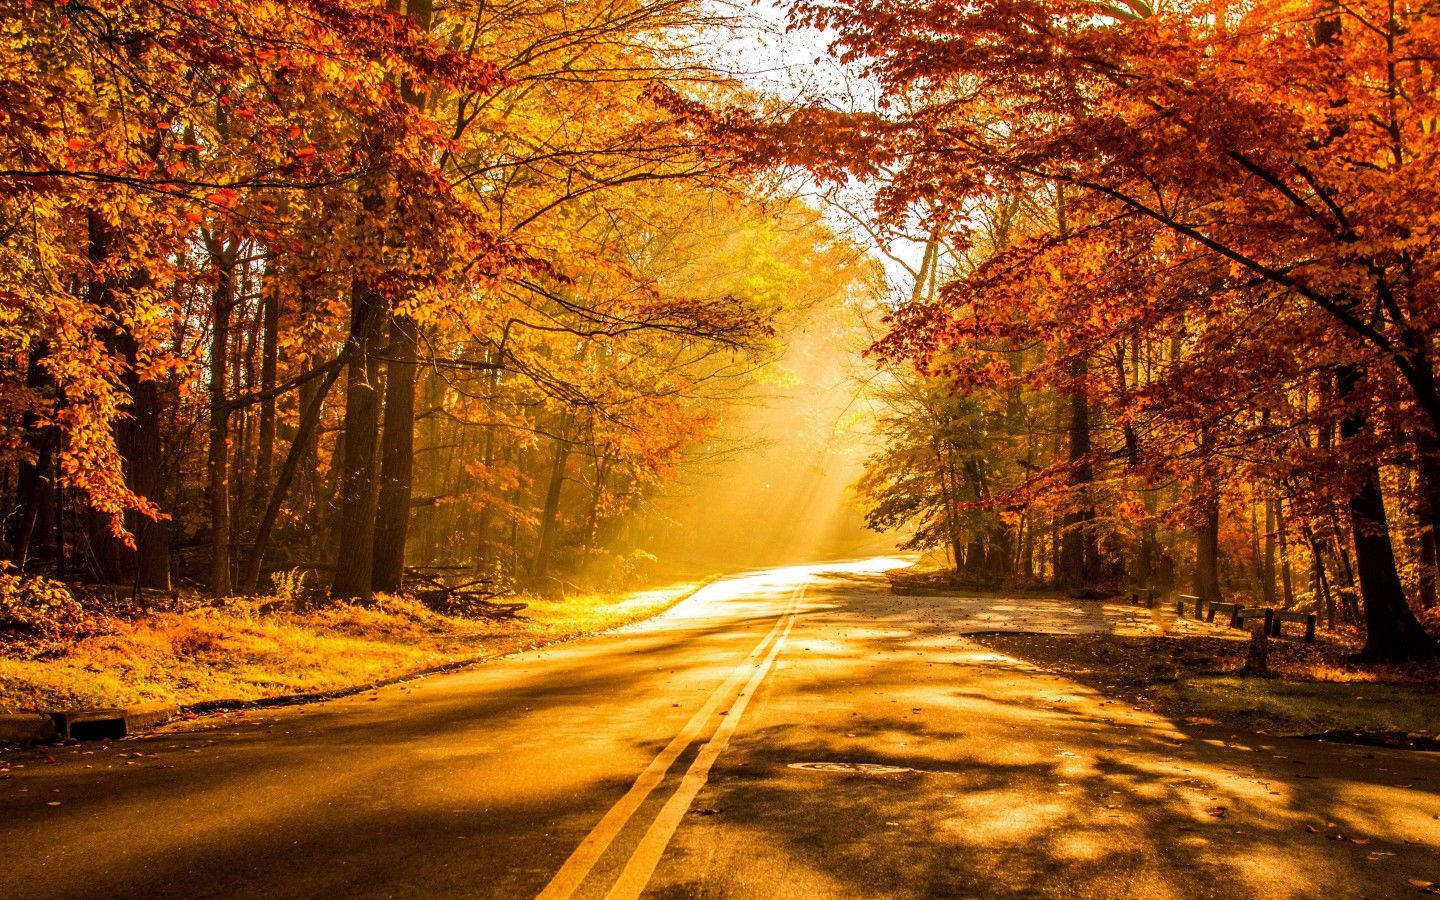 A peaceful sunset along a tree lined country road in the Autumn. Wallpaper